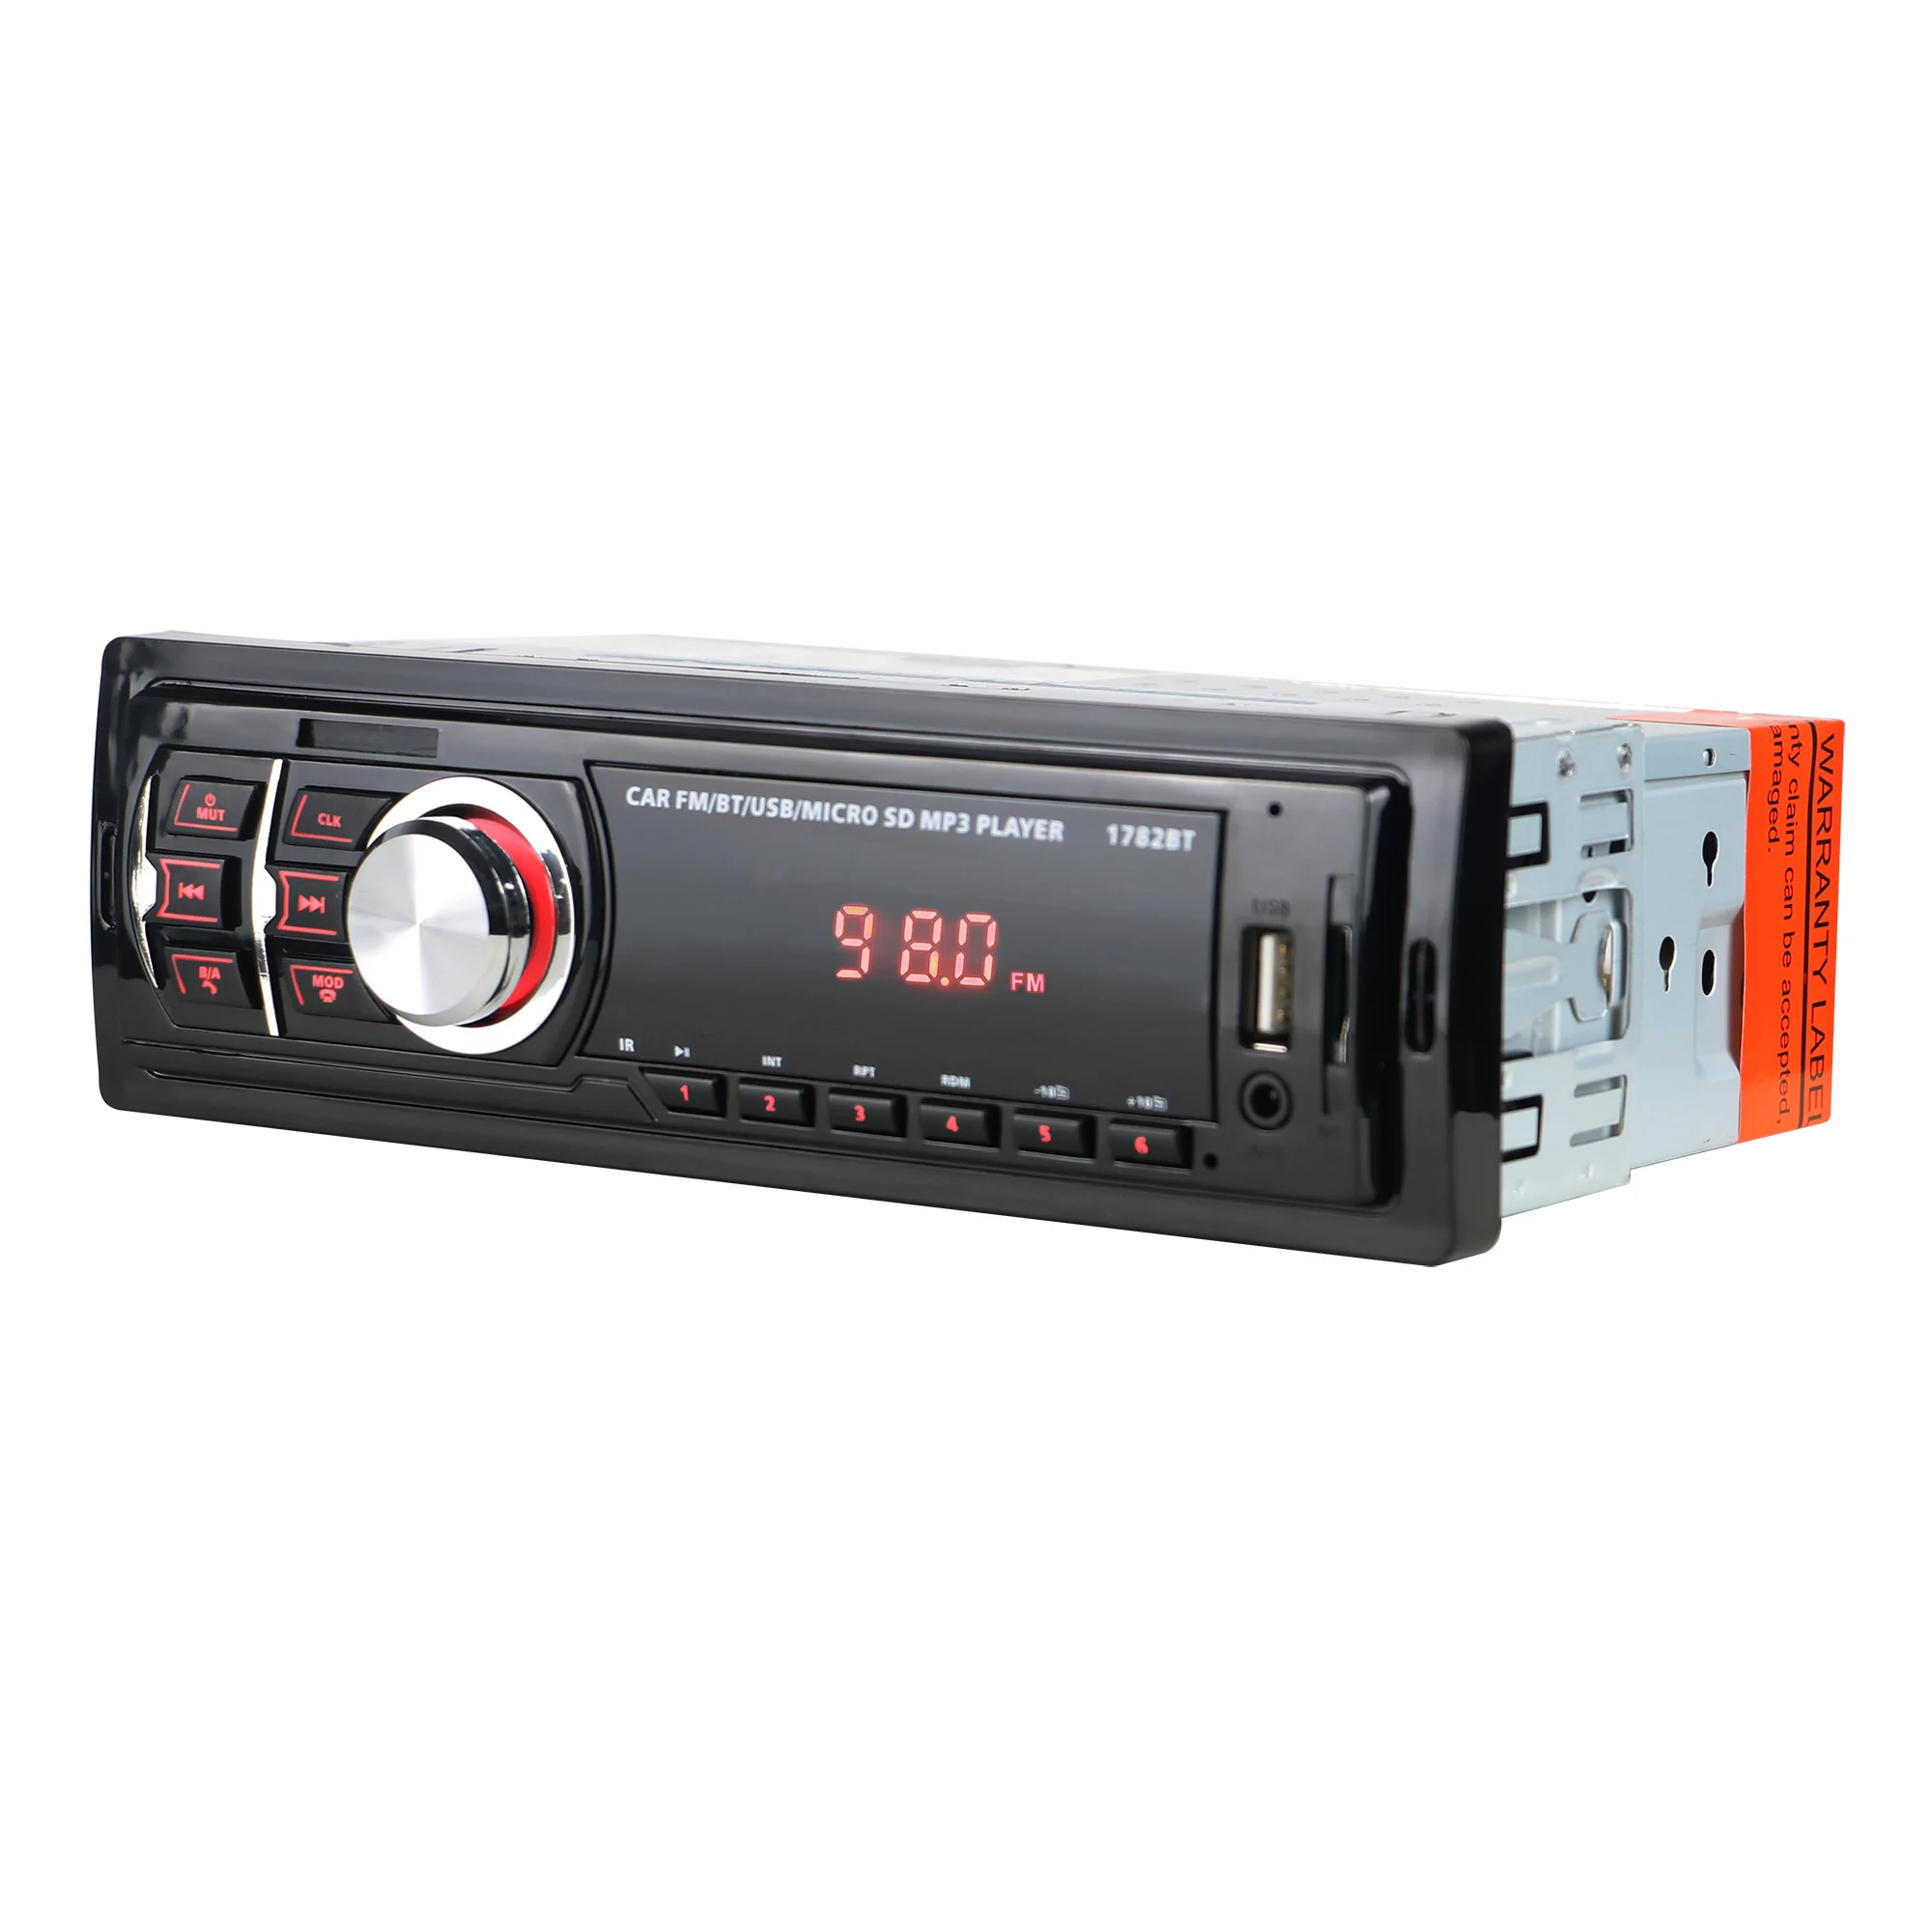 1 Din Stereo Aux-in Mp3 Fm Receiver Sd Audio Led Display Car Mp3 Player -  Buy Car Mp3 Player Manual,Car Audio Mp3 Usb Player,Driver Car Mp3 Player  Product on Alibaba.com